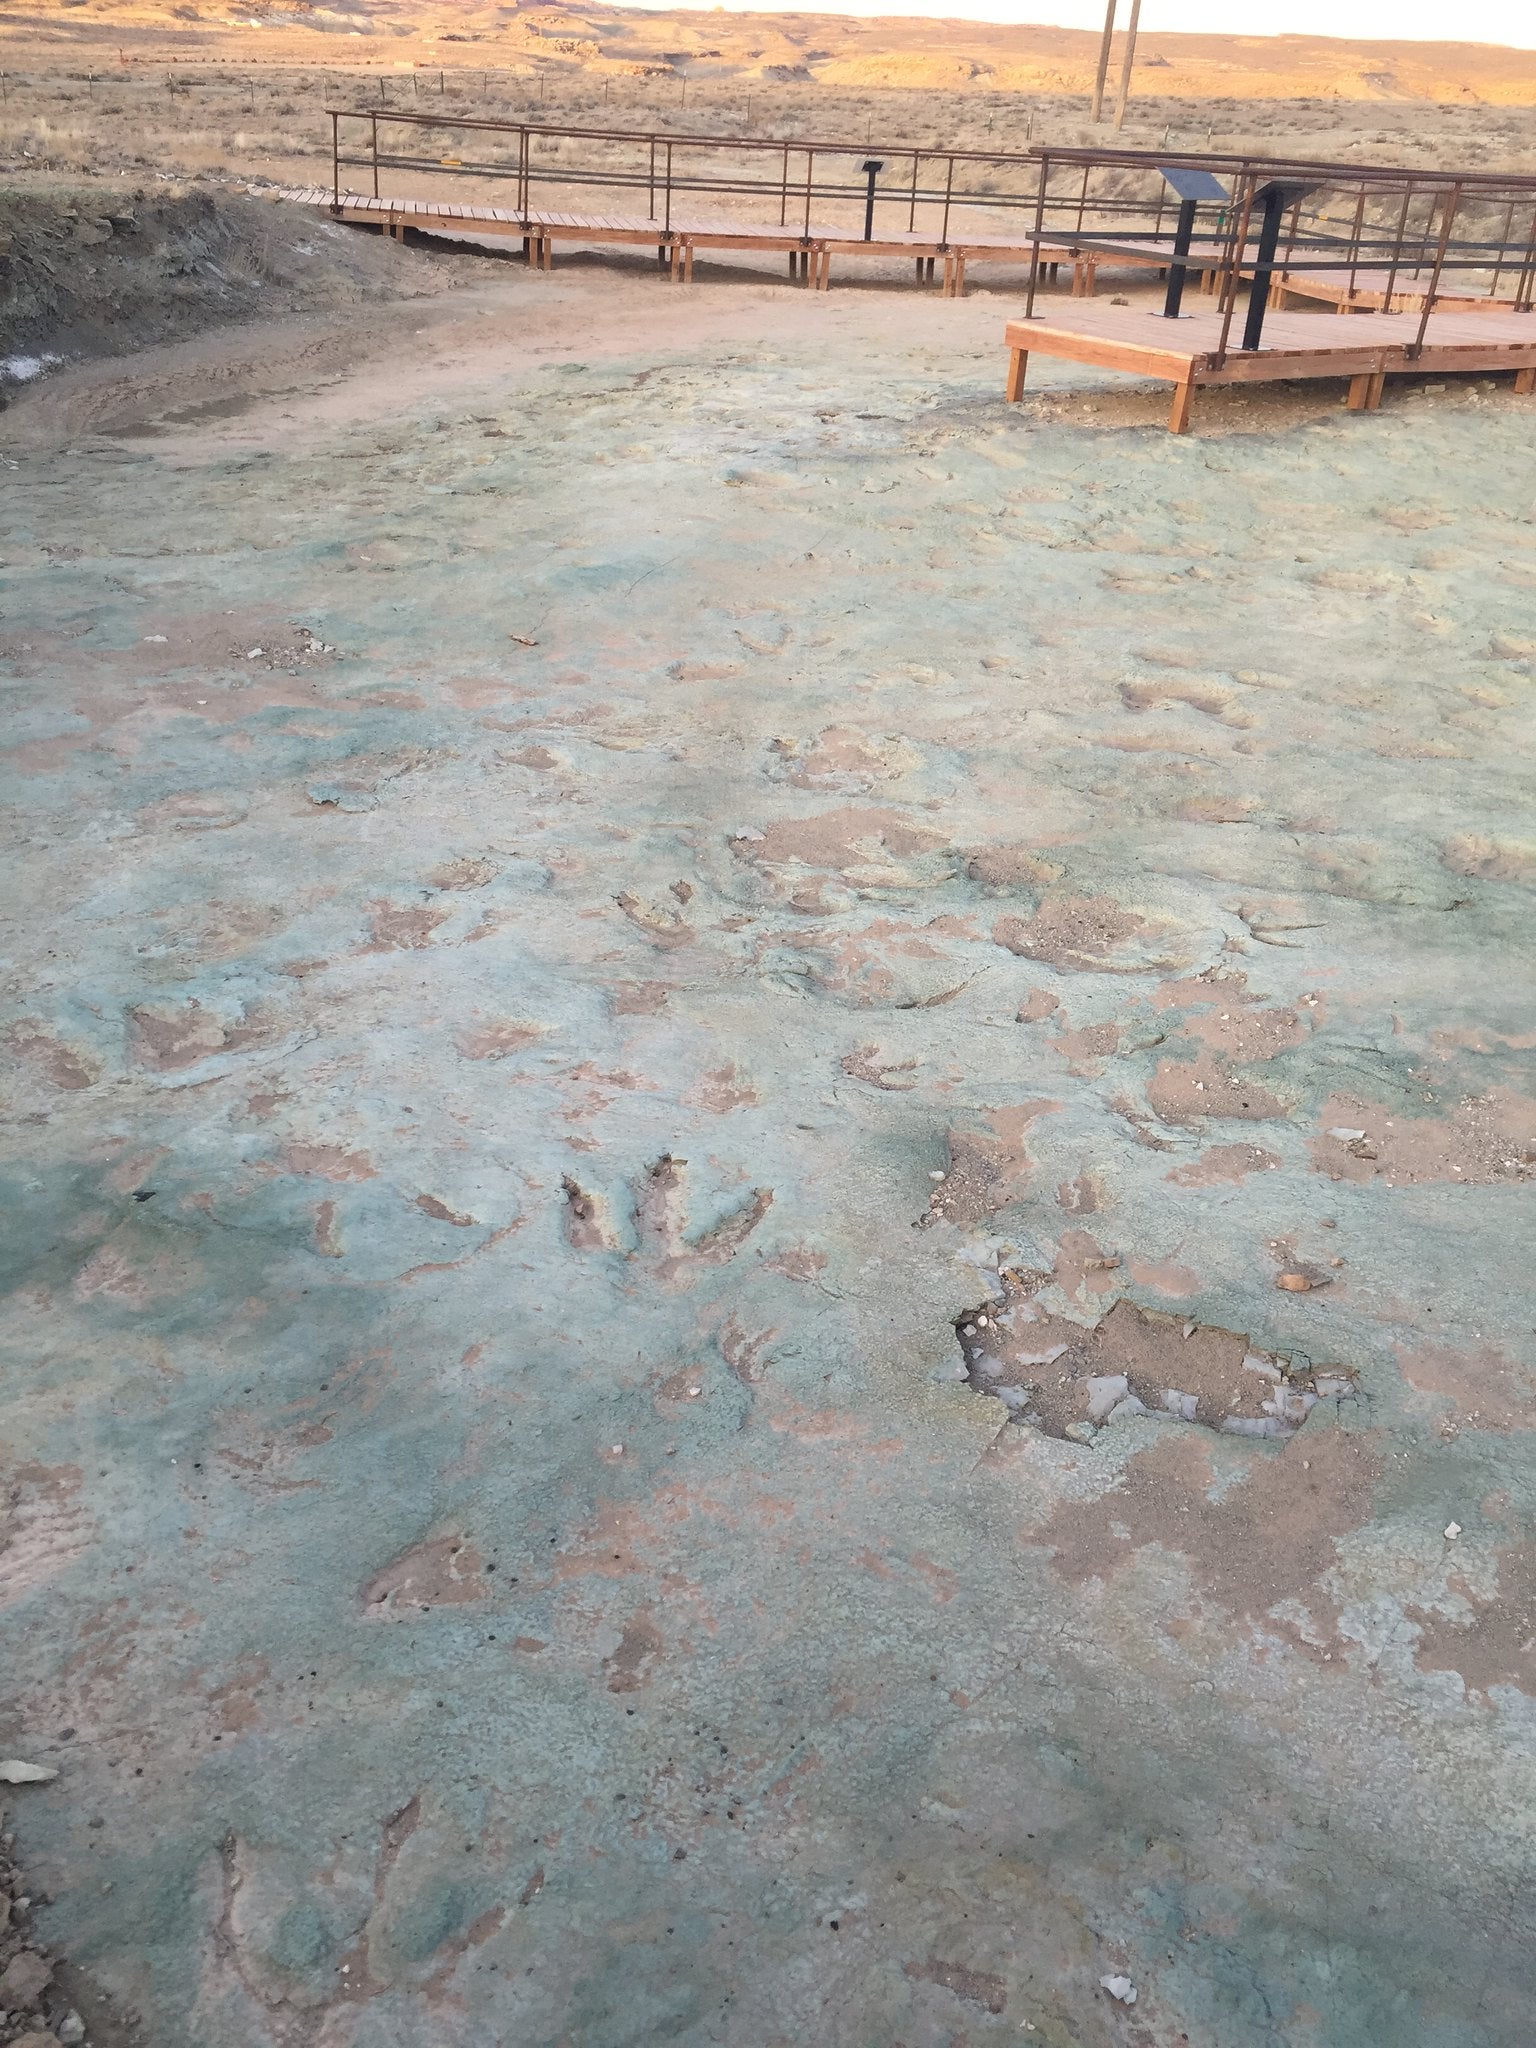 Dinosaur Tracks Damaged After Construction Crew Drove Over Fossil Site, Report Finds